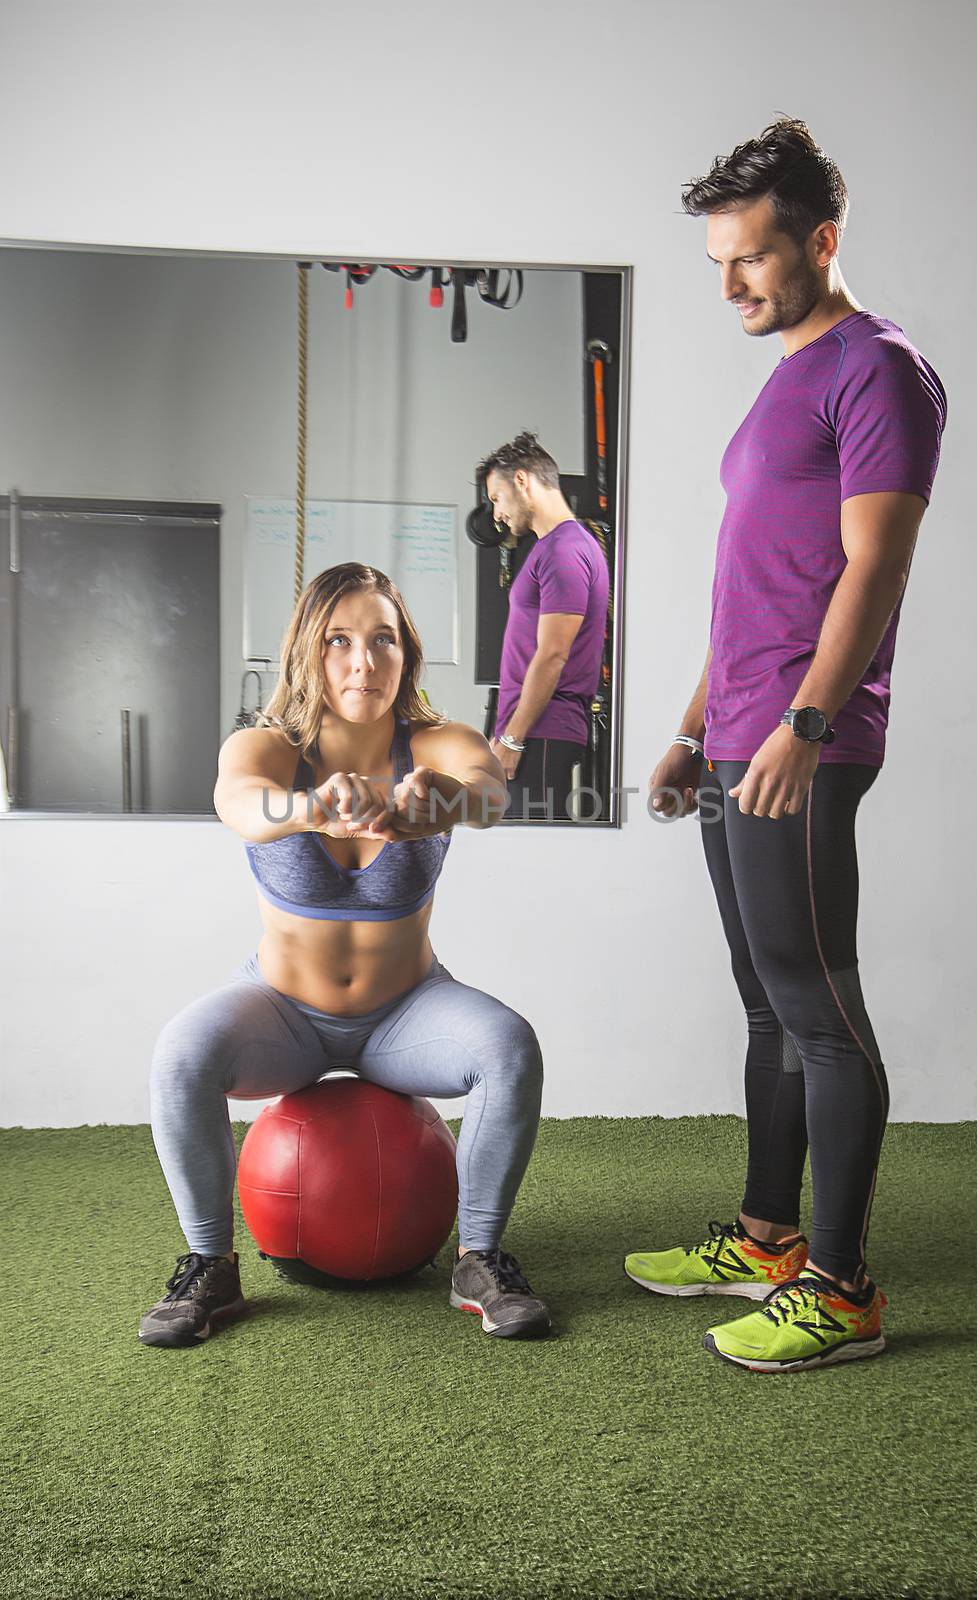 Young woman doing a squat on a red medicine ball with a trainer watching her